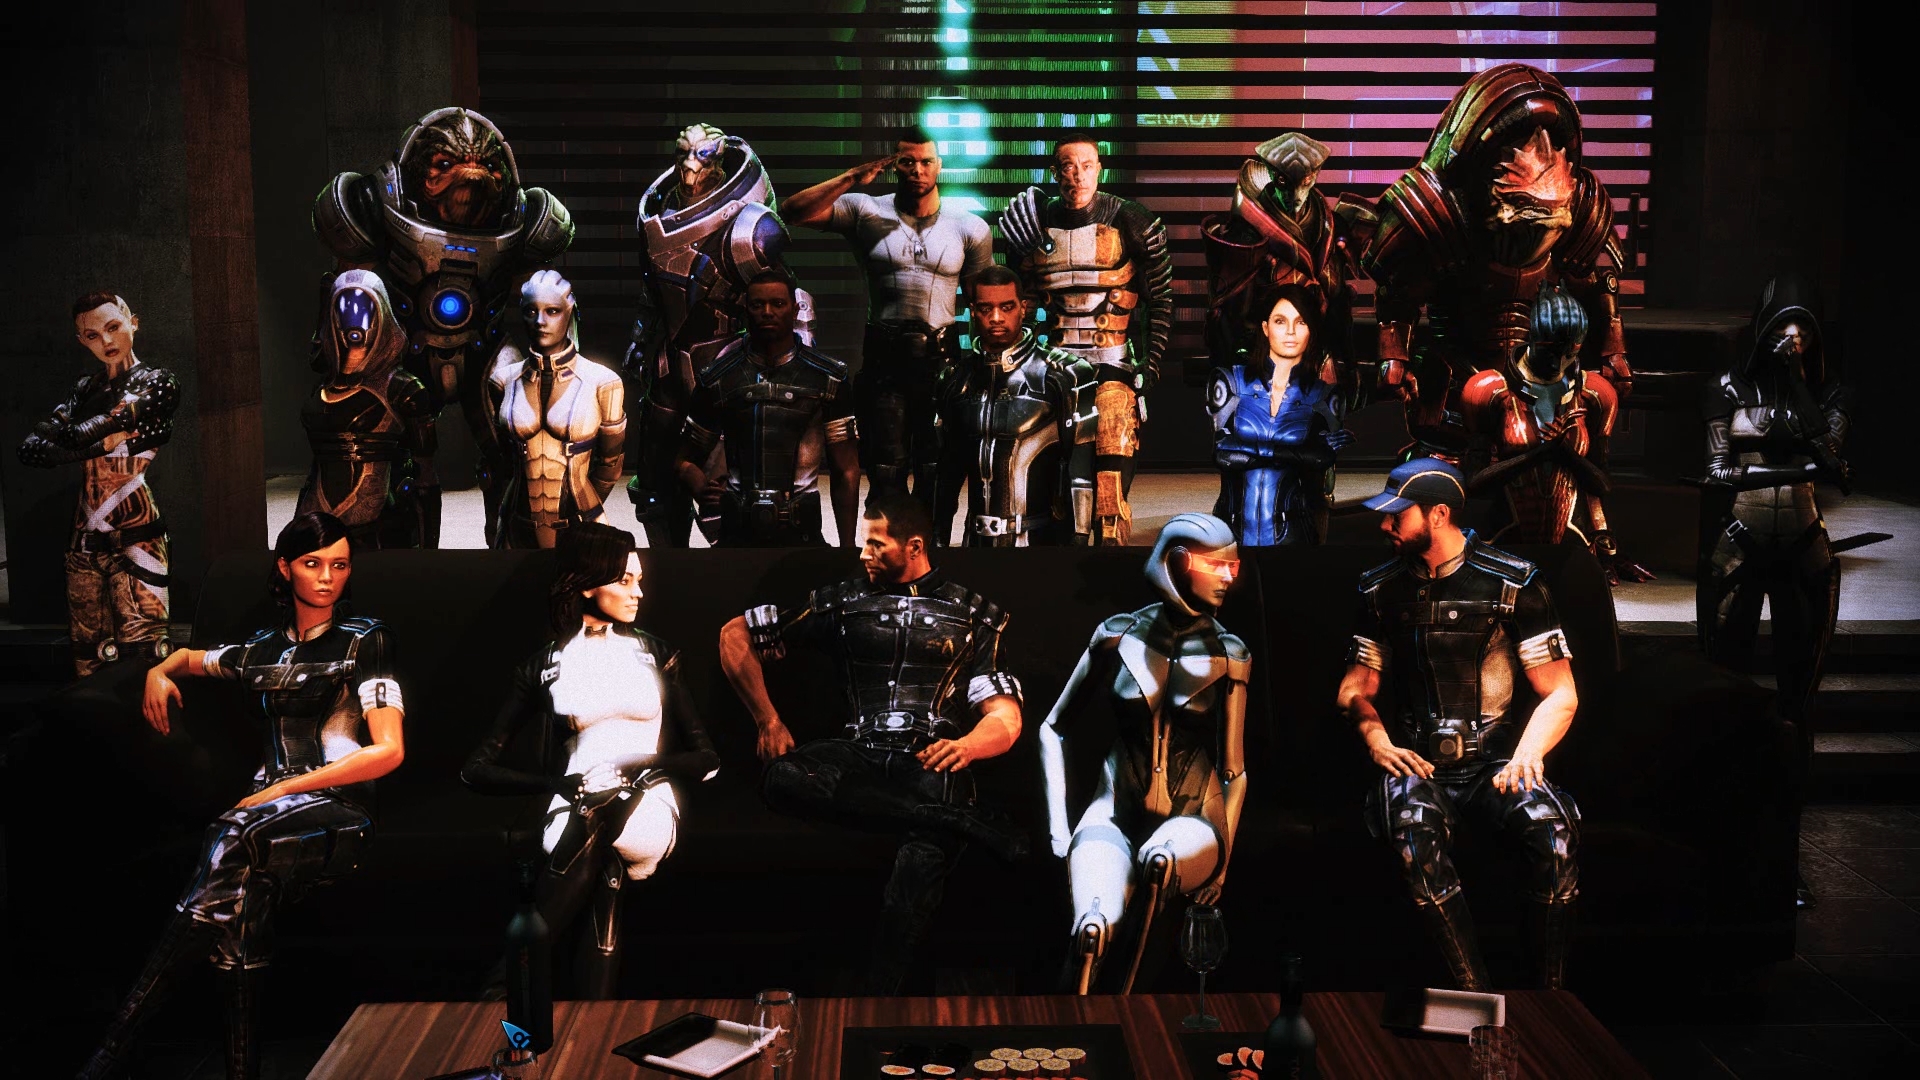 Sqaud group photo - Citadel DLC by Anzeroth